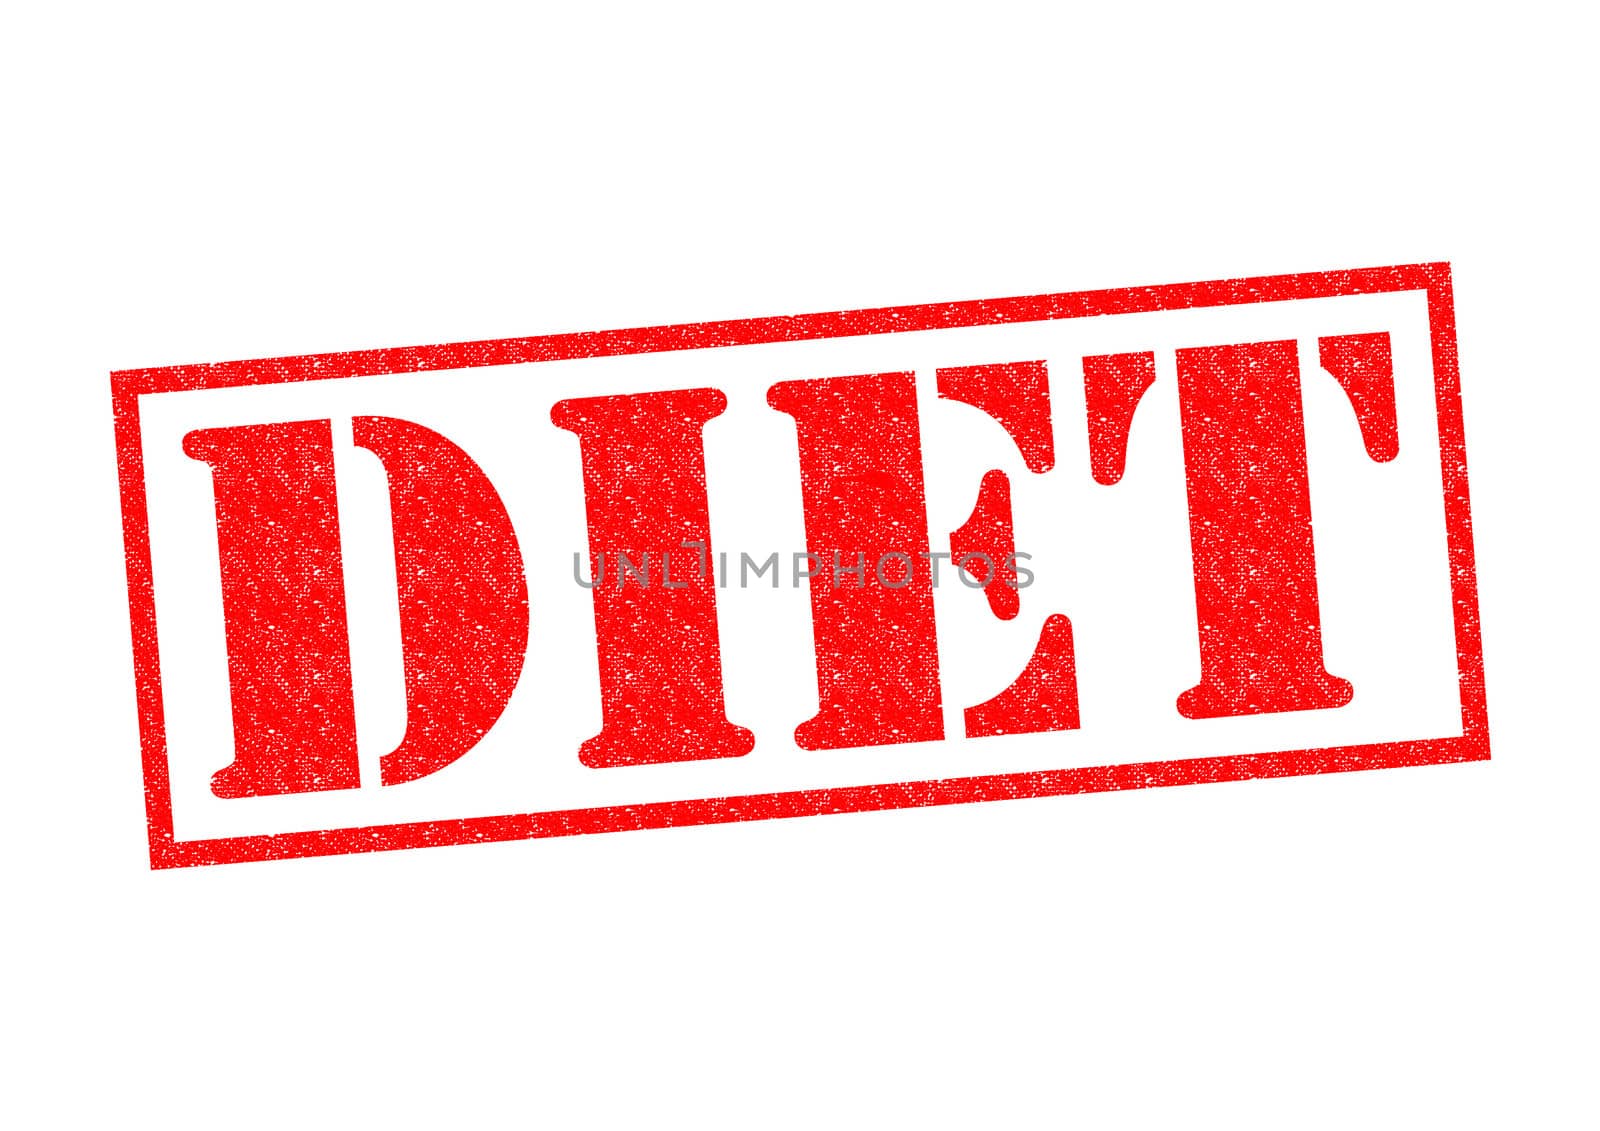 DIET red Rubber Stamp over a white background.